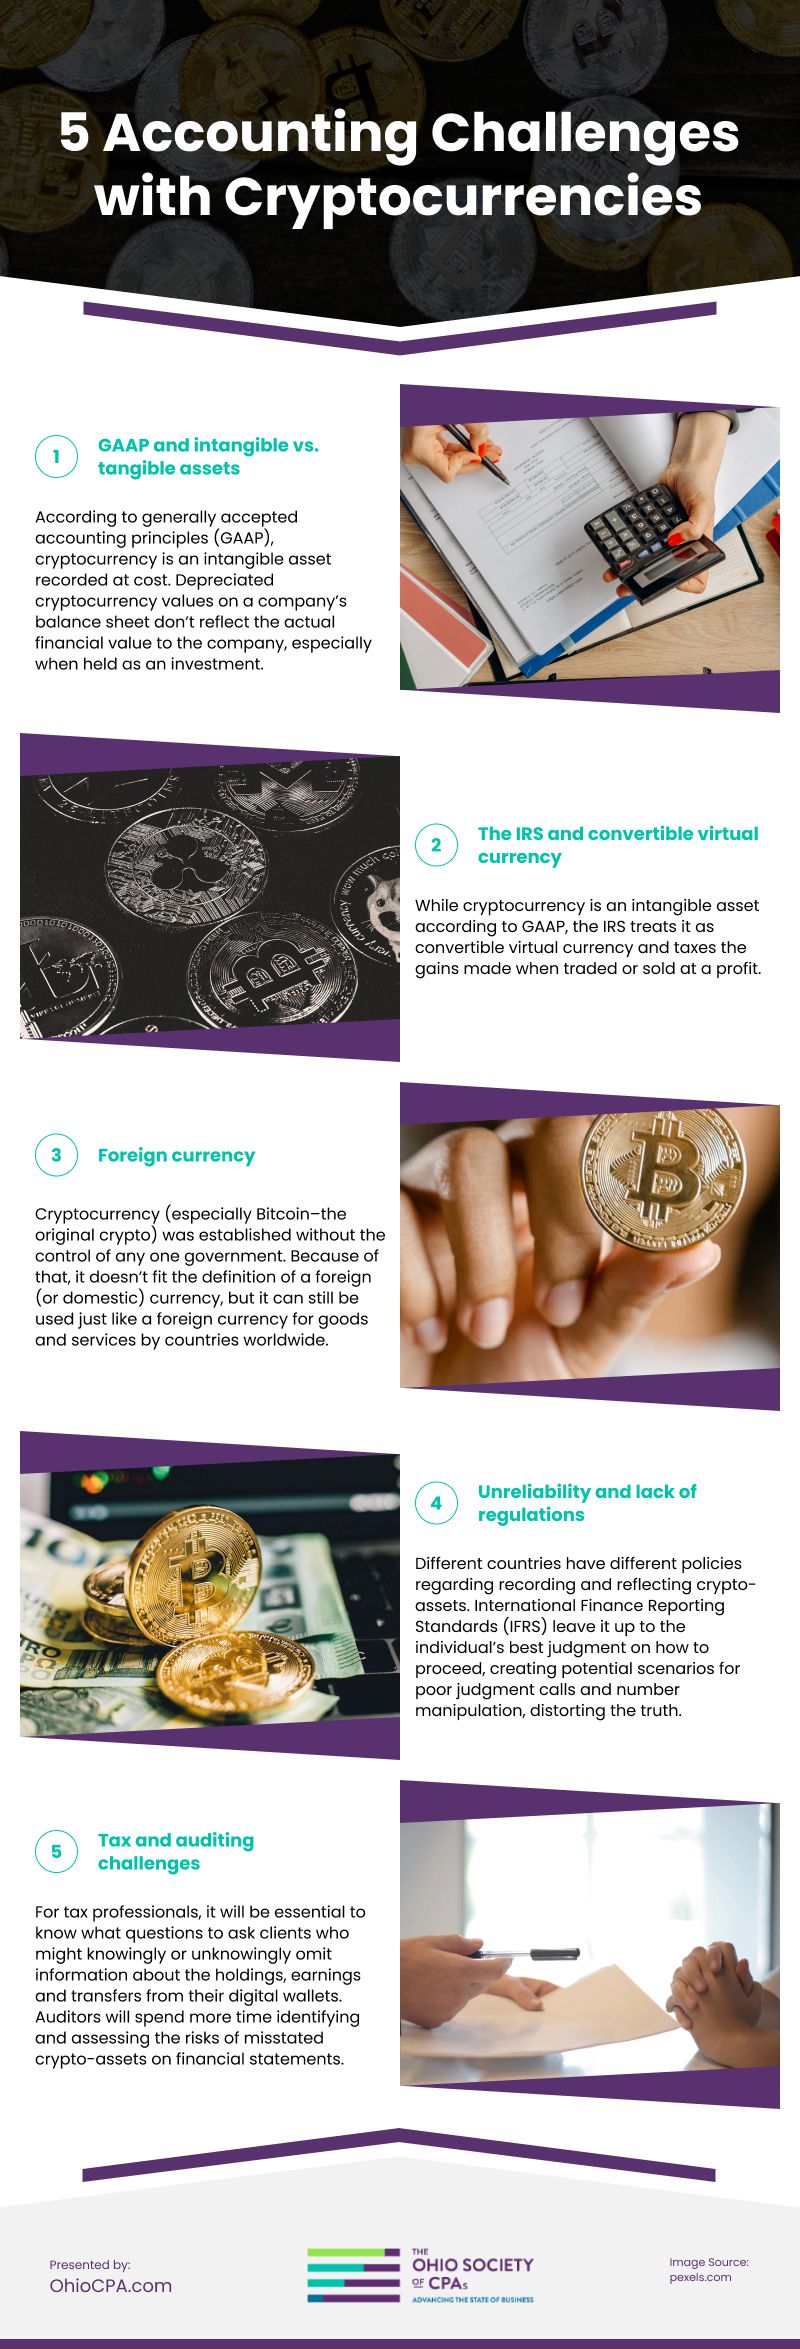 5 Accounting Challenges with Cryptocurrencies Infographic